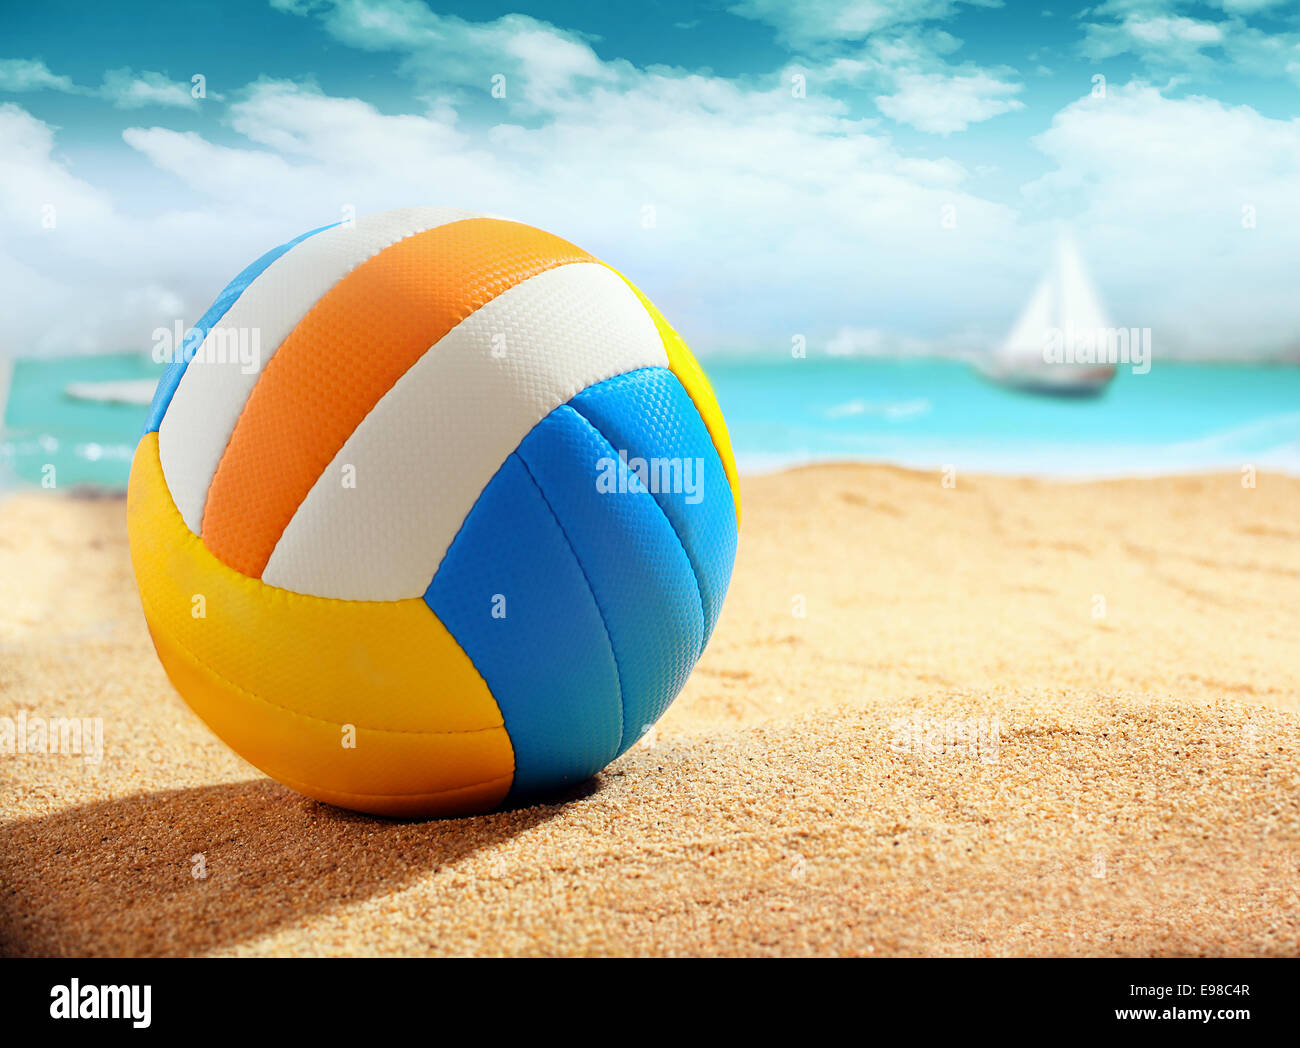 Colourful beach ball on the golden sand of a tropical beach with the ocean and a yacht visible behind, shallow dof Stock Photo